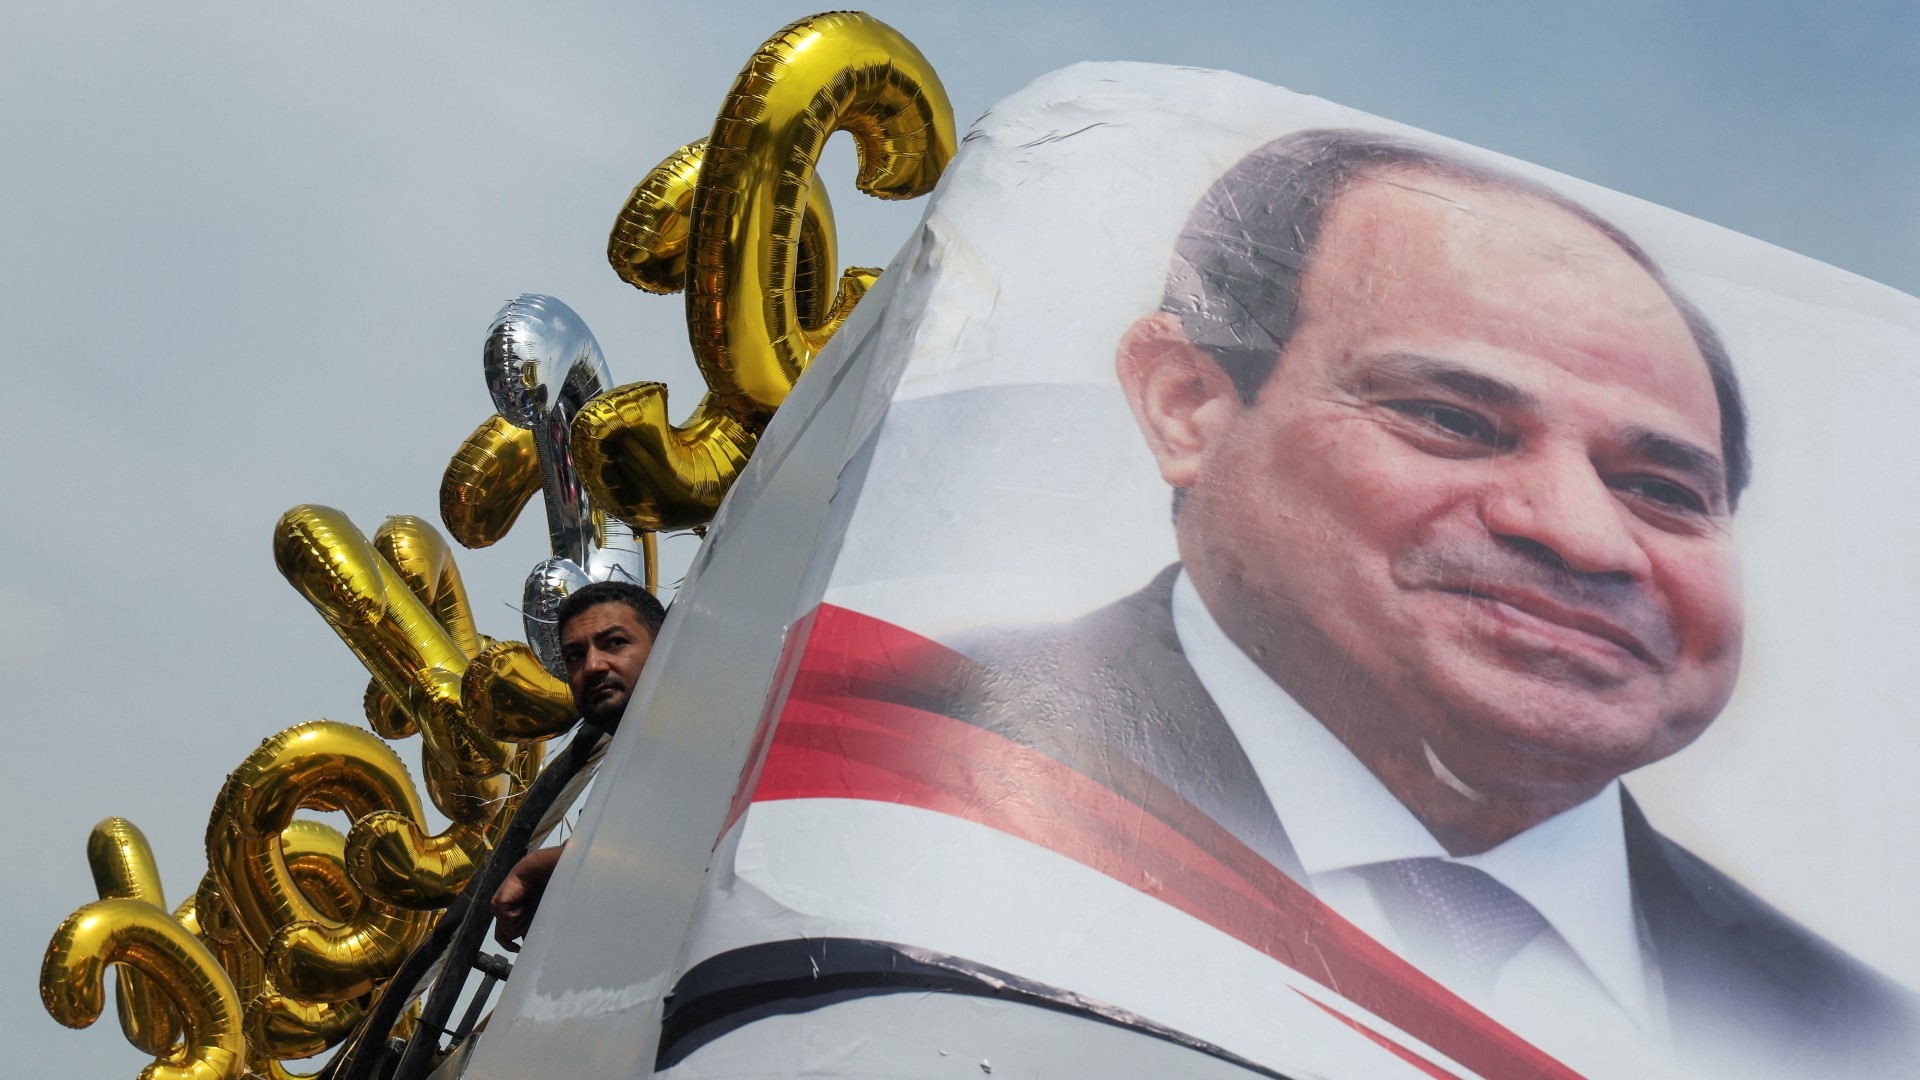 A supporter of Abdel Fattah el-Sisi looks on near a banner depicting the Egyptian president amid preparations for a rally to back his candidacy in in Giza, 2 October (Reuters)